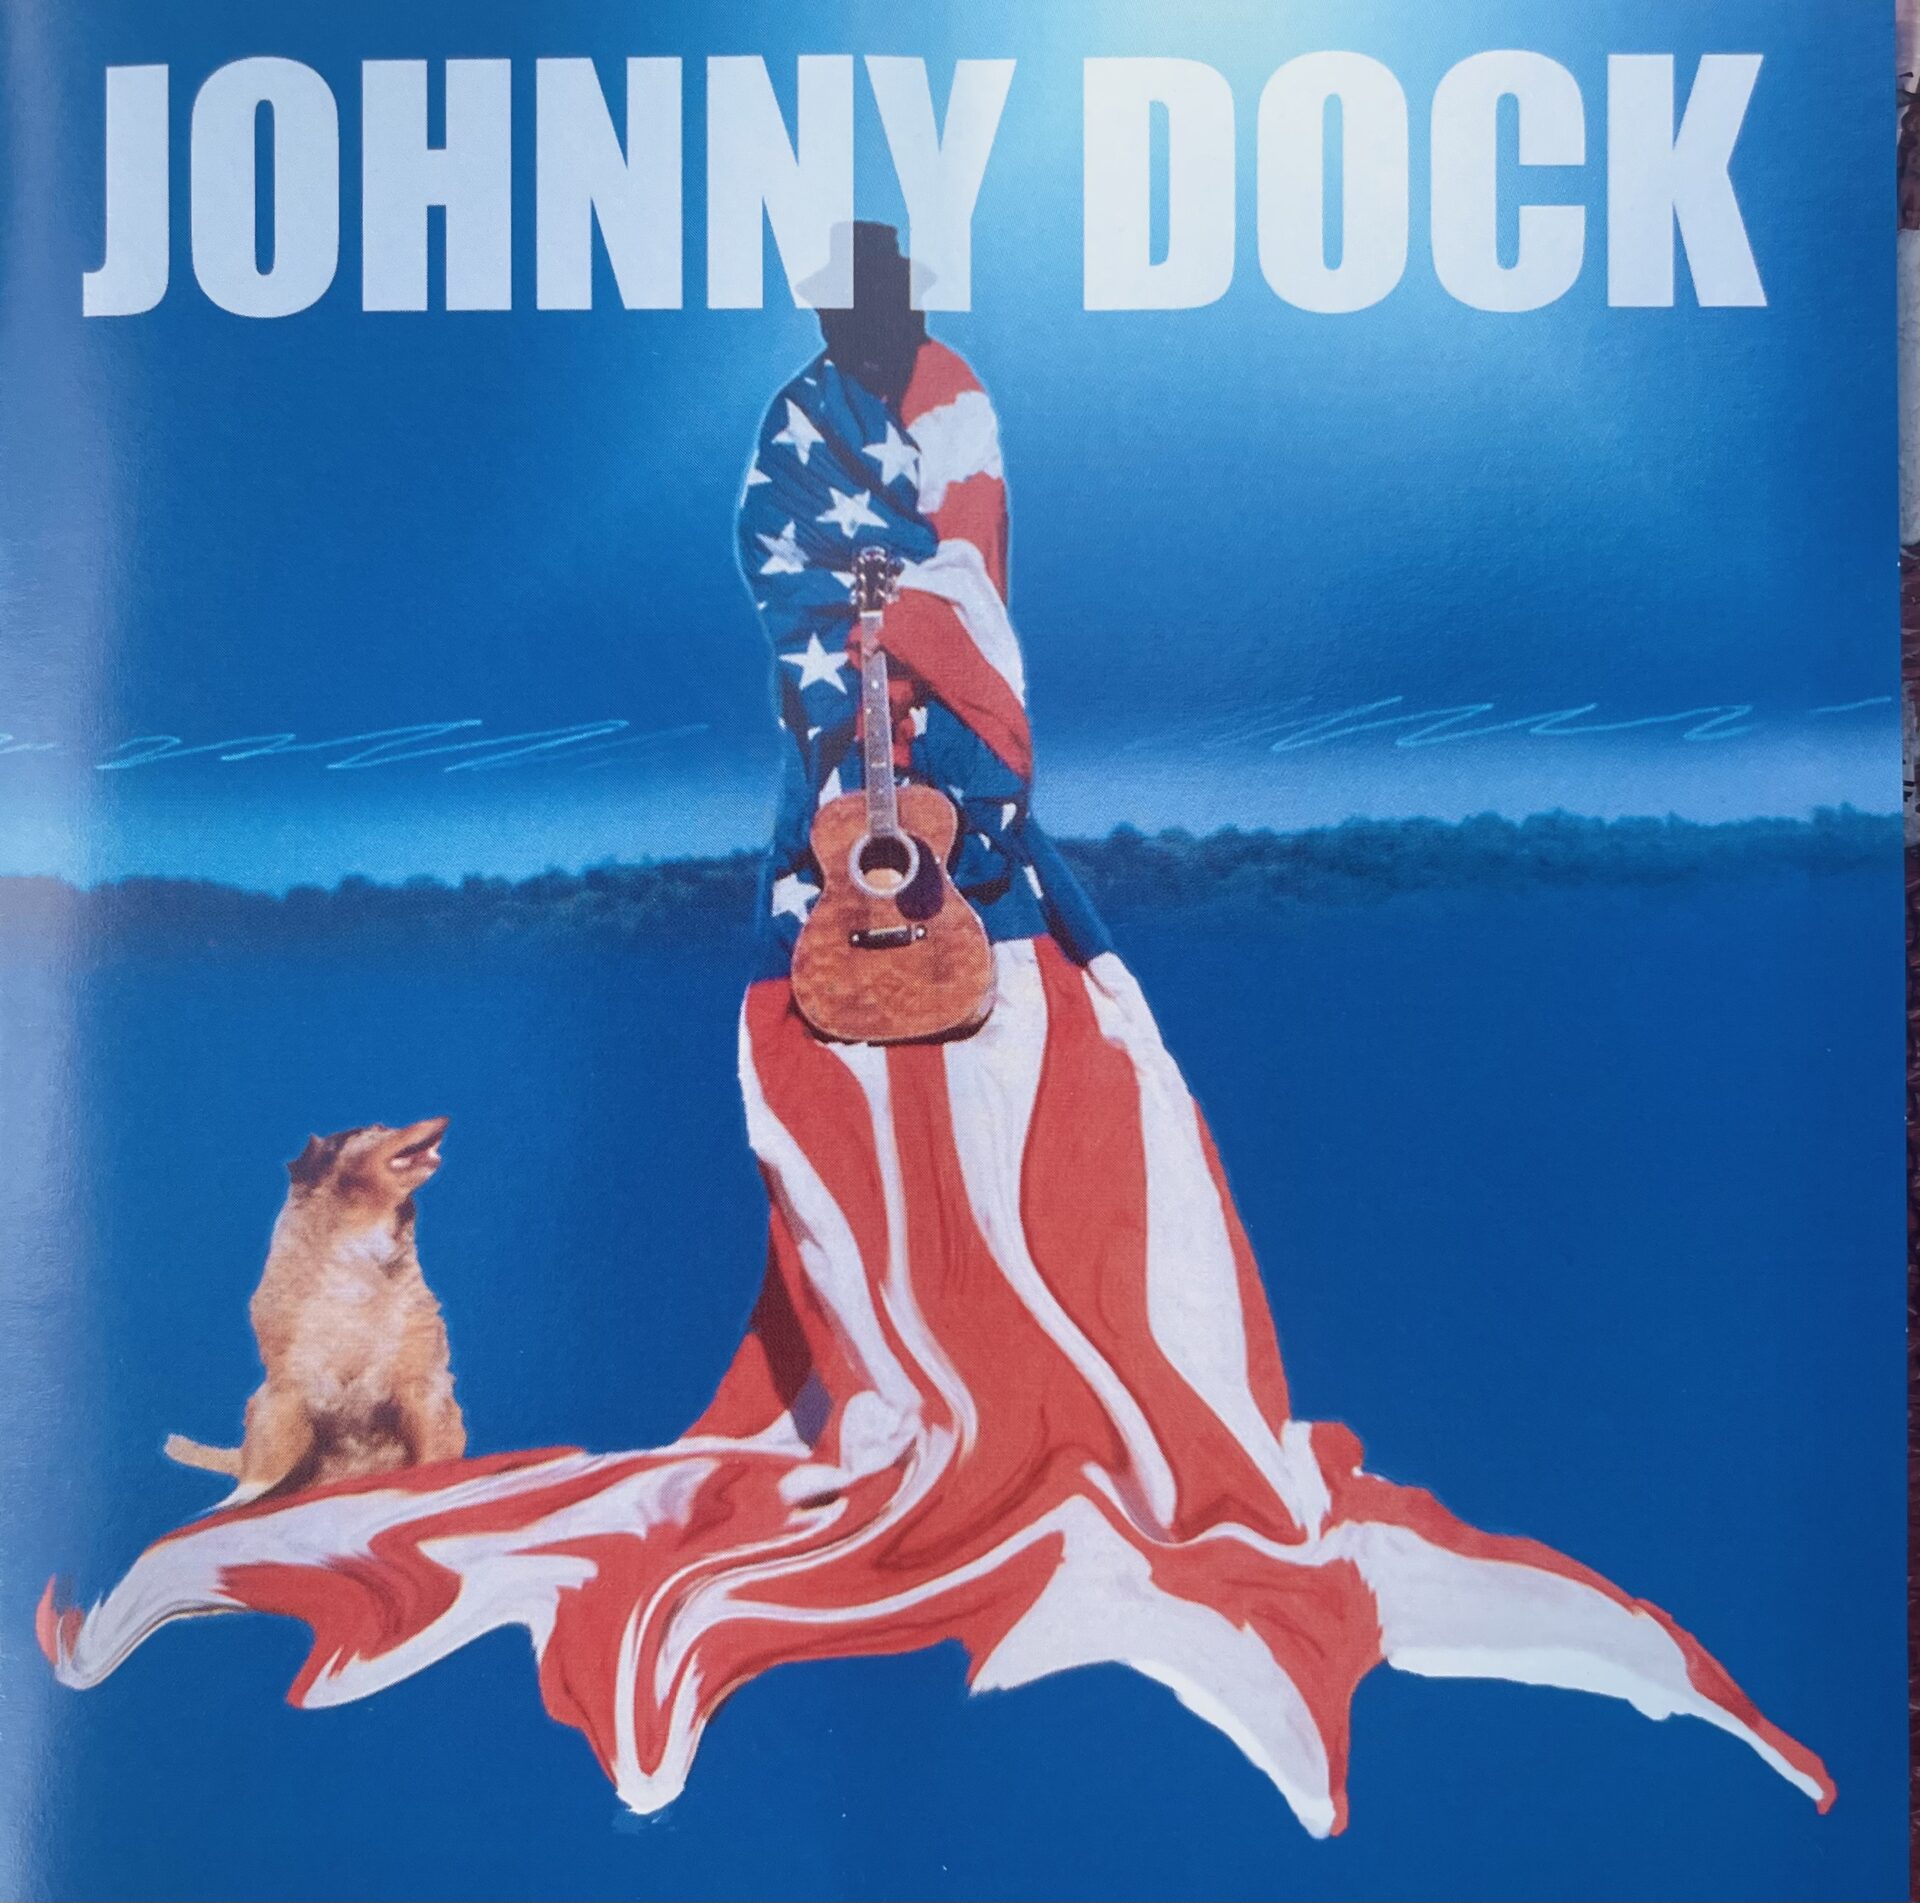 Johnny dock wrapped in the american flag